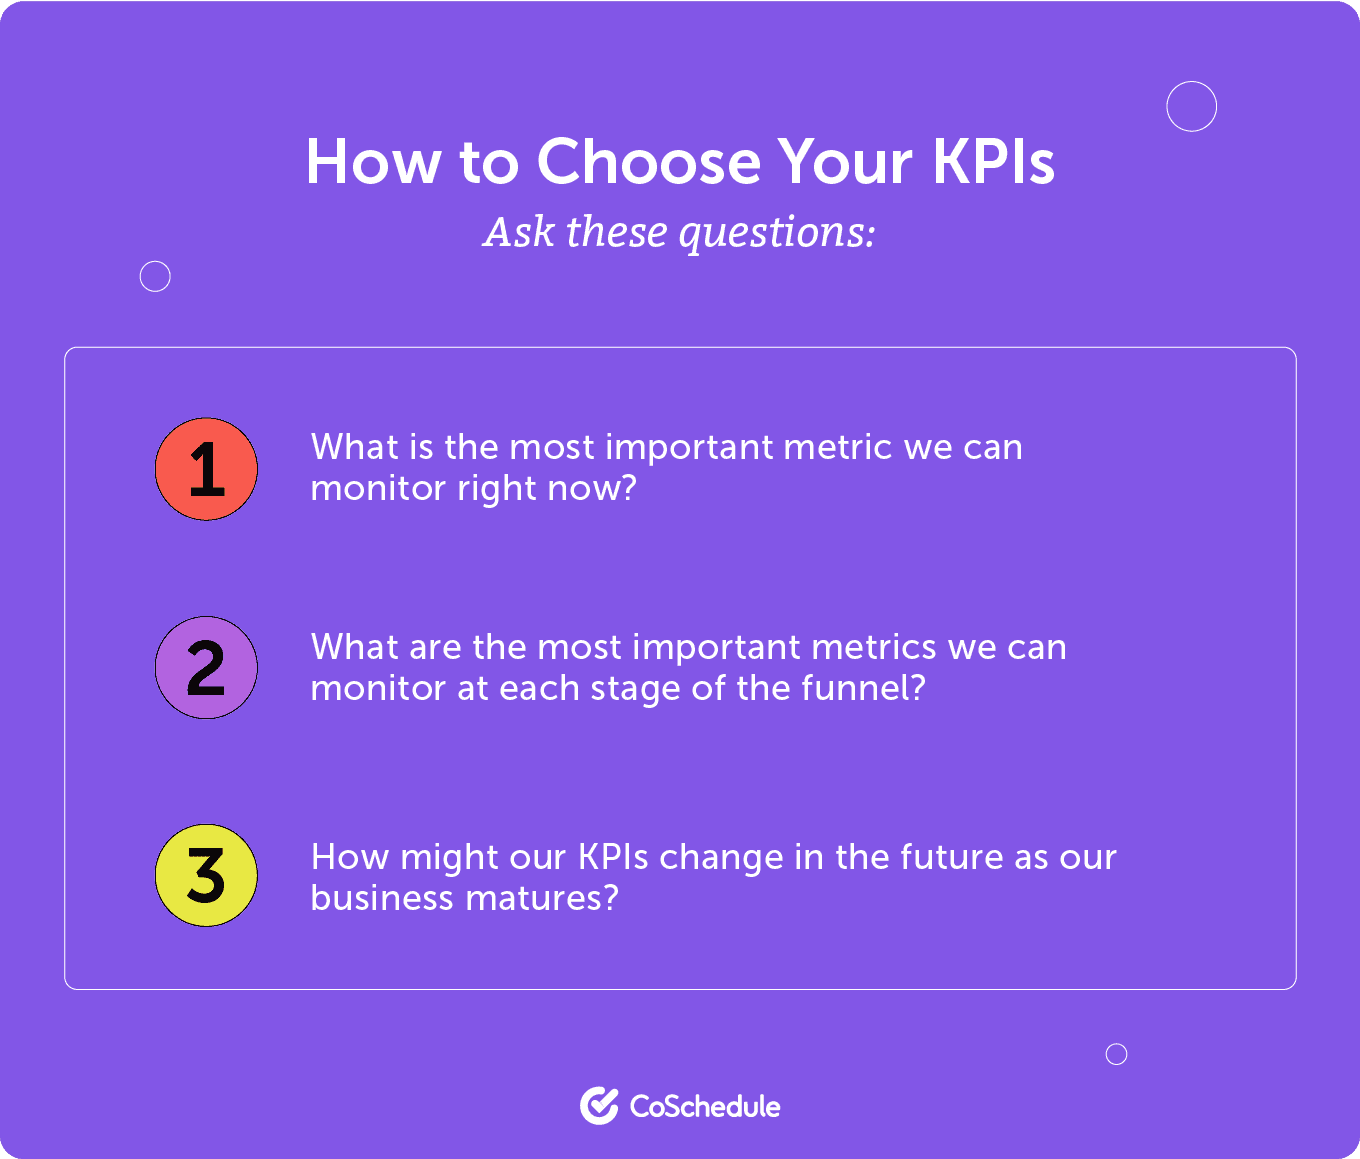 How to choose your KPIs